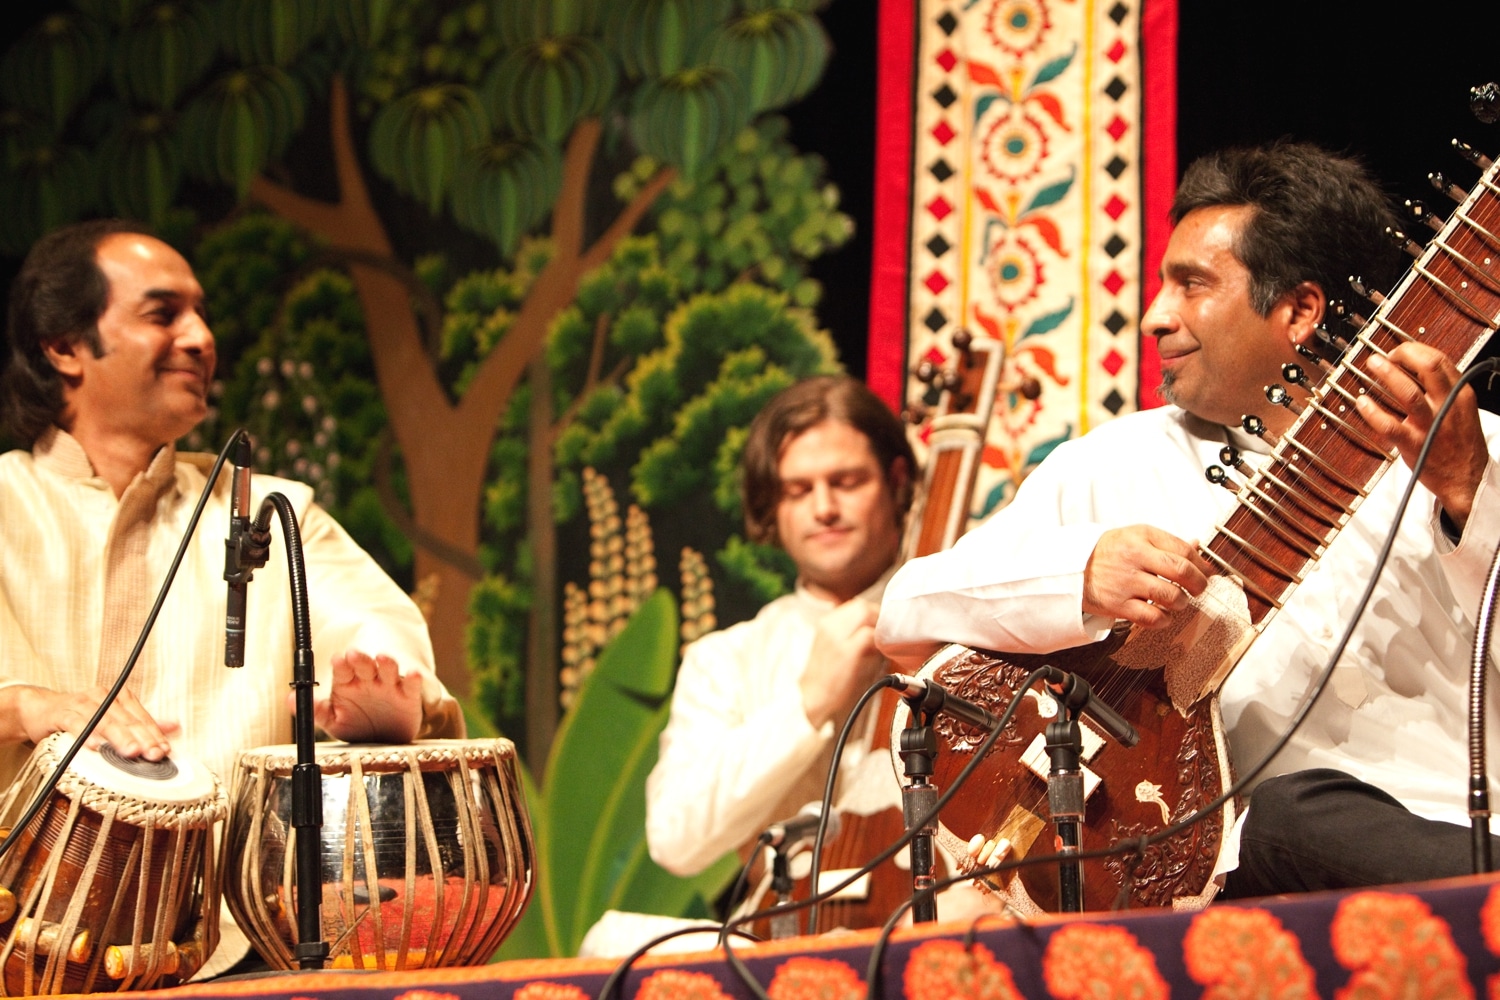 Music Circle continues historic performances of Indian music at Oxy